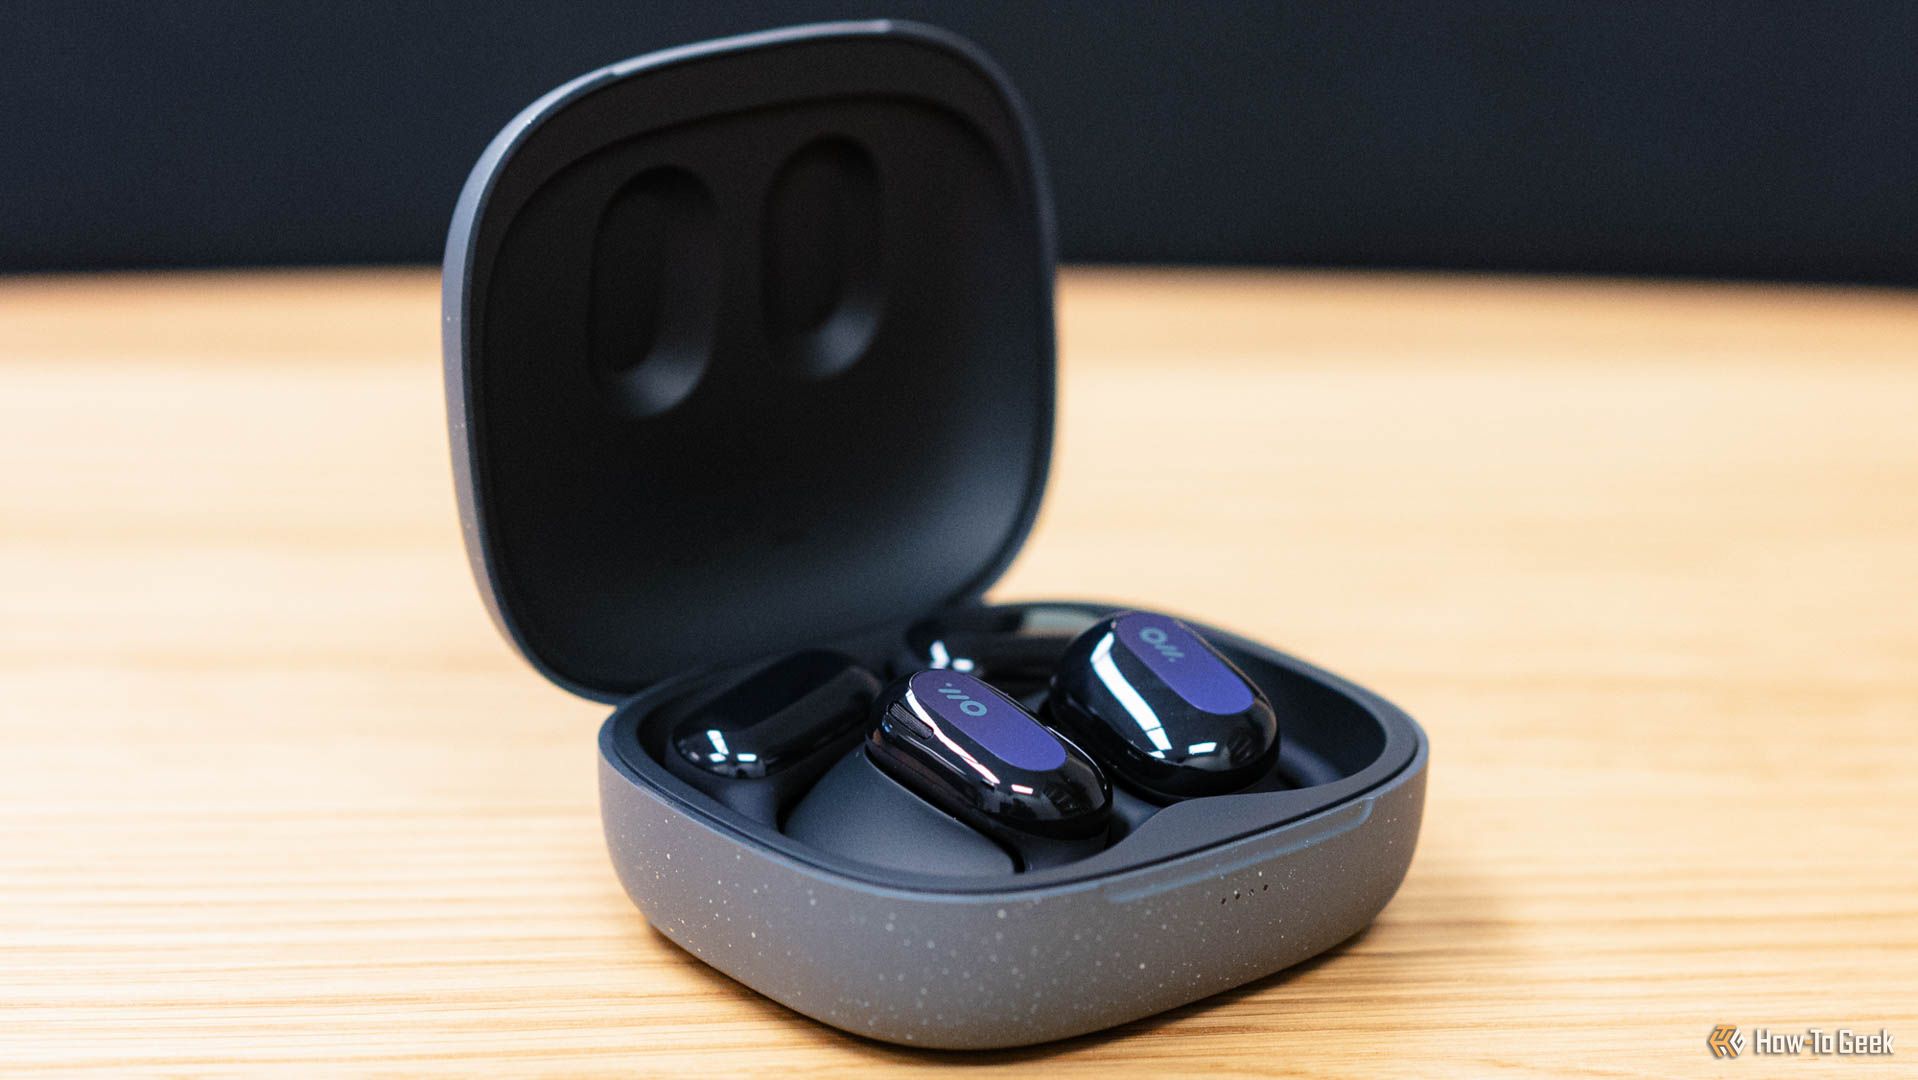 The Oladance Open-Ear Headphones in the charging case.